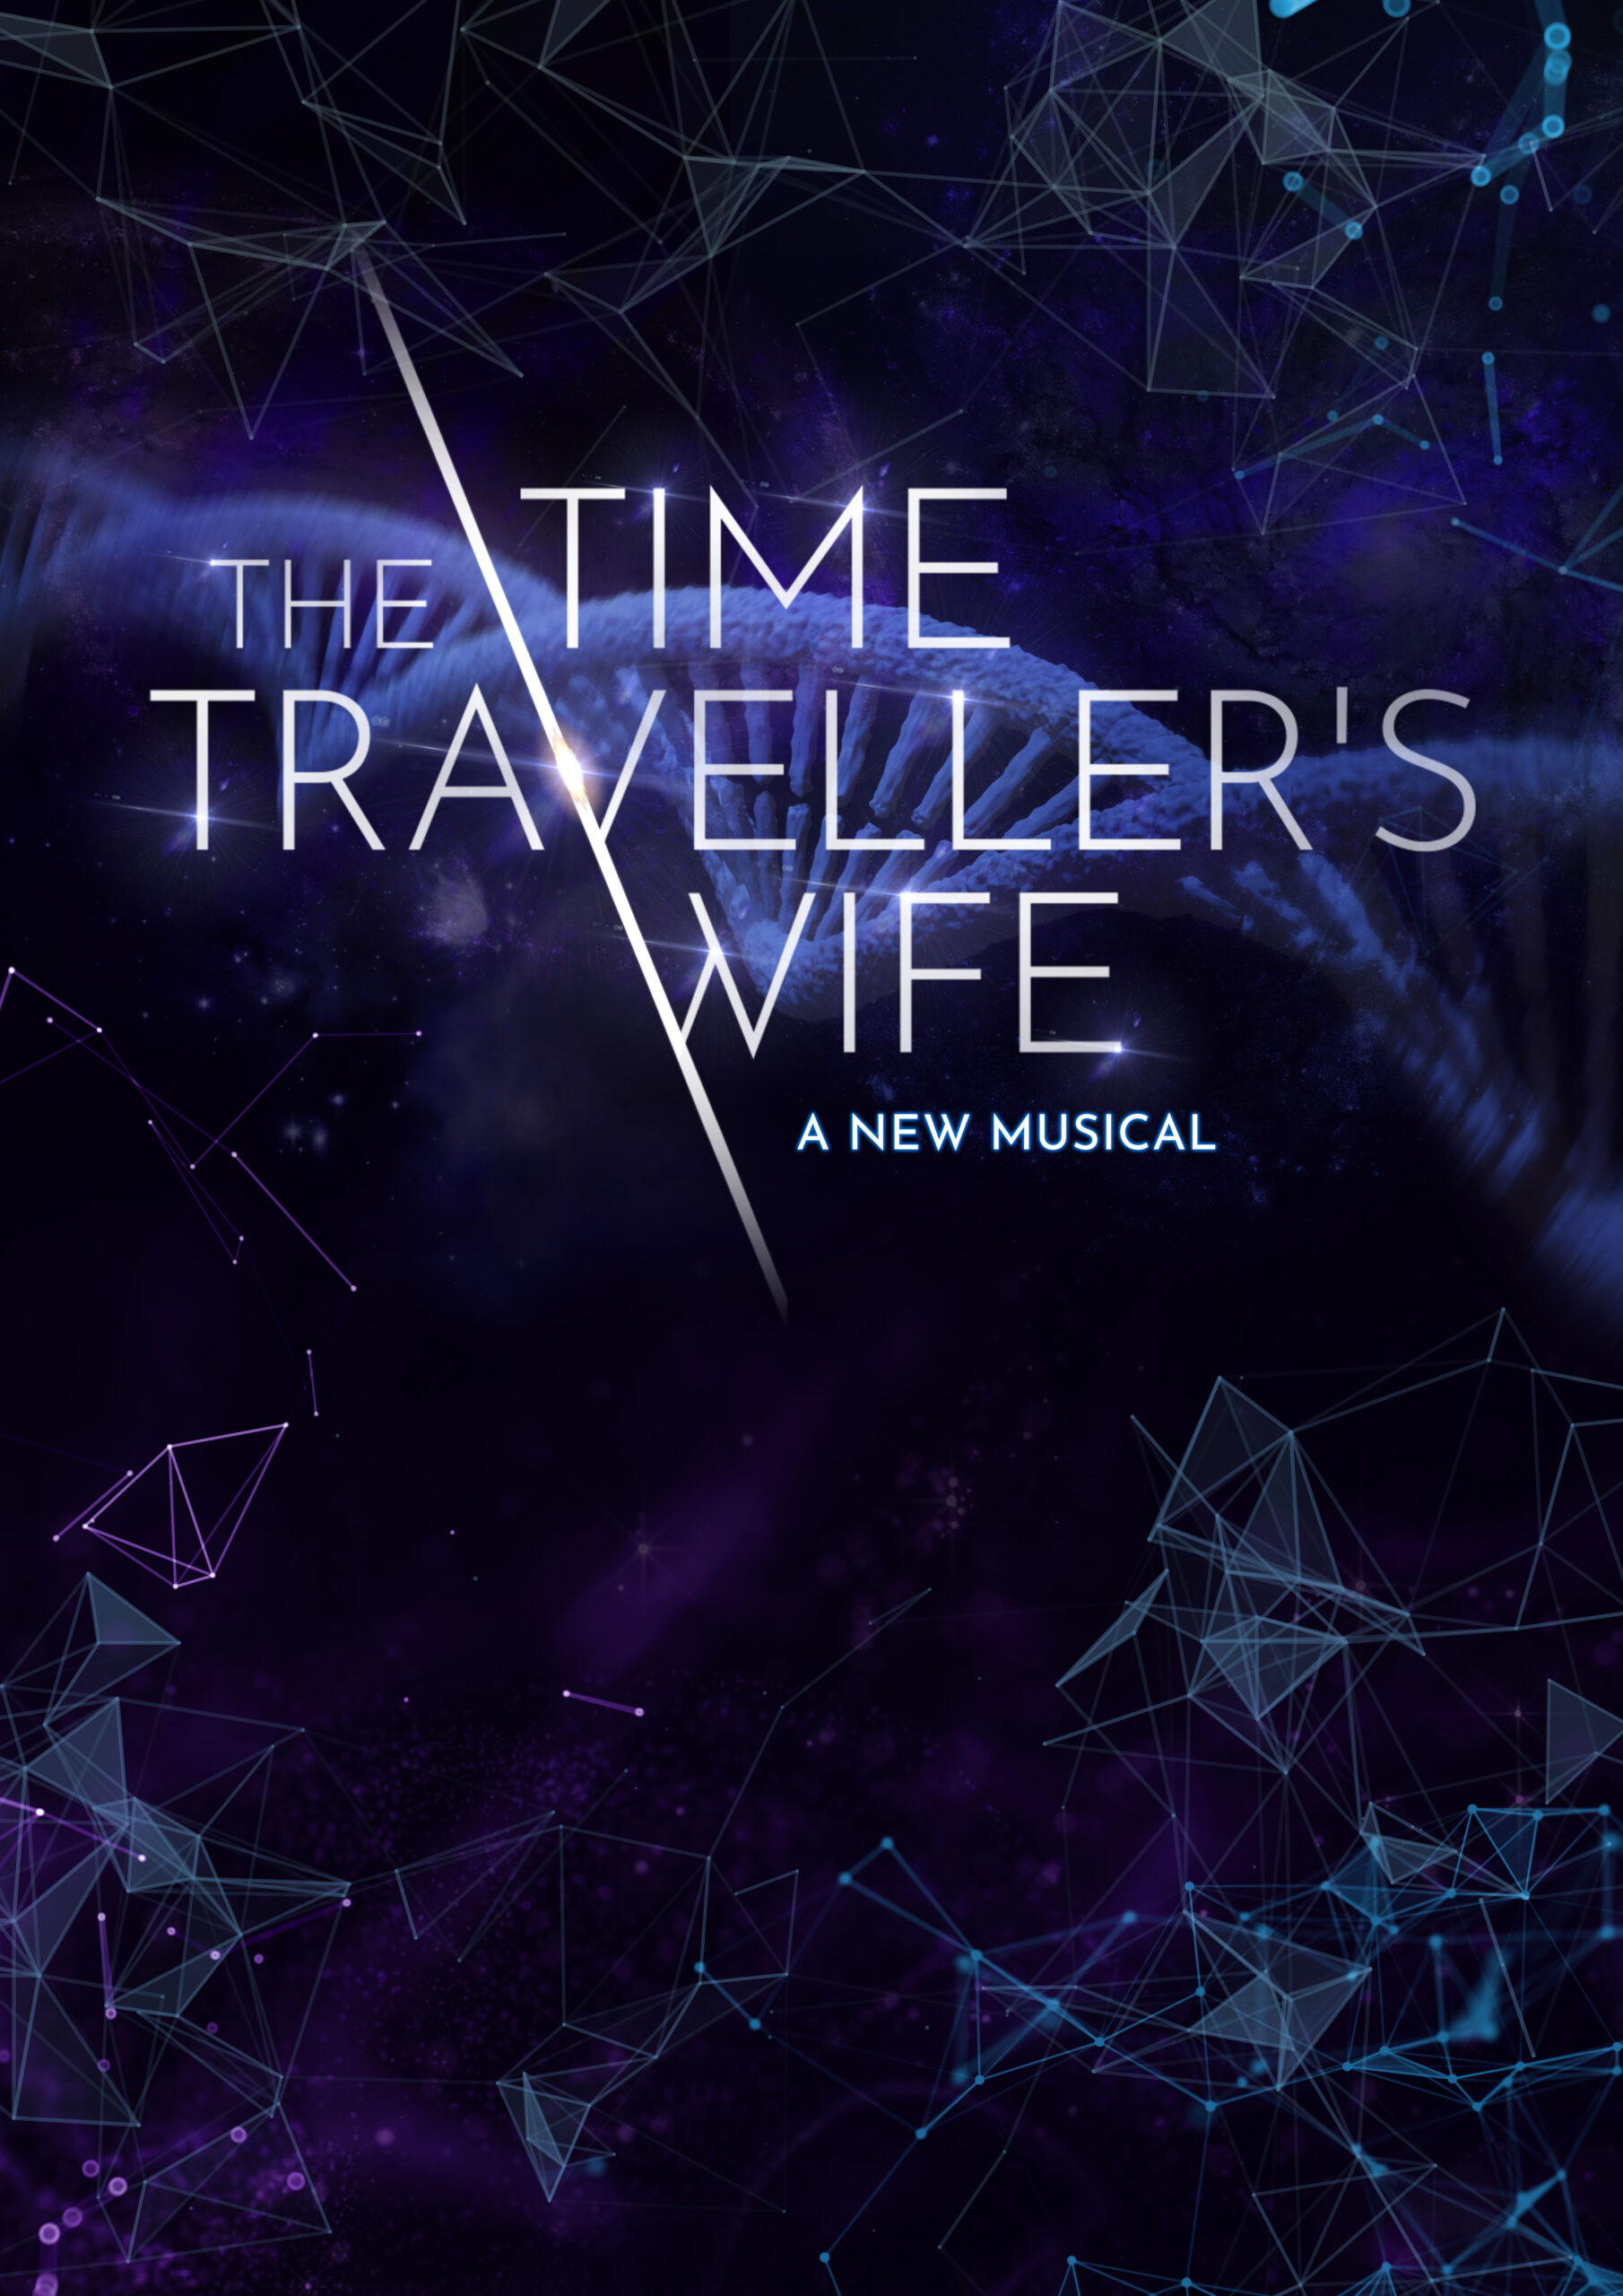 Joss Stone and Dave Stewart to pen songs for The Time Traveller's